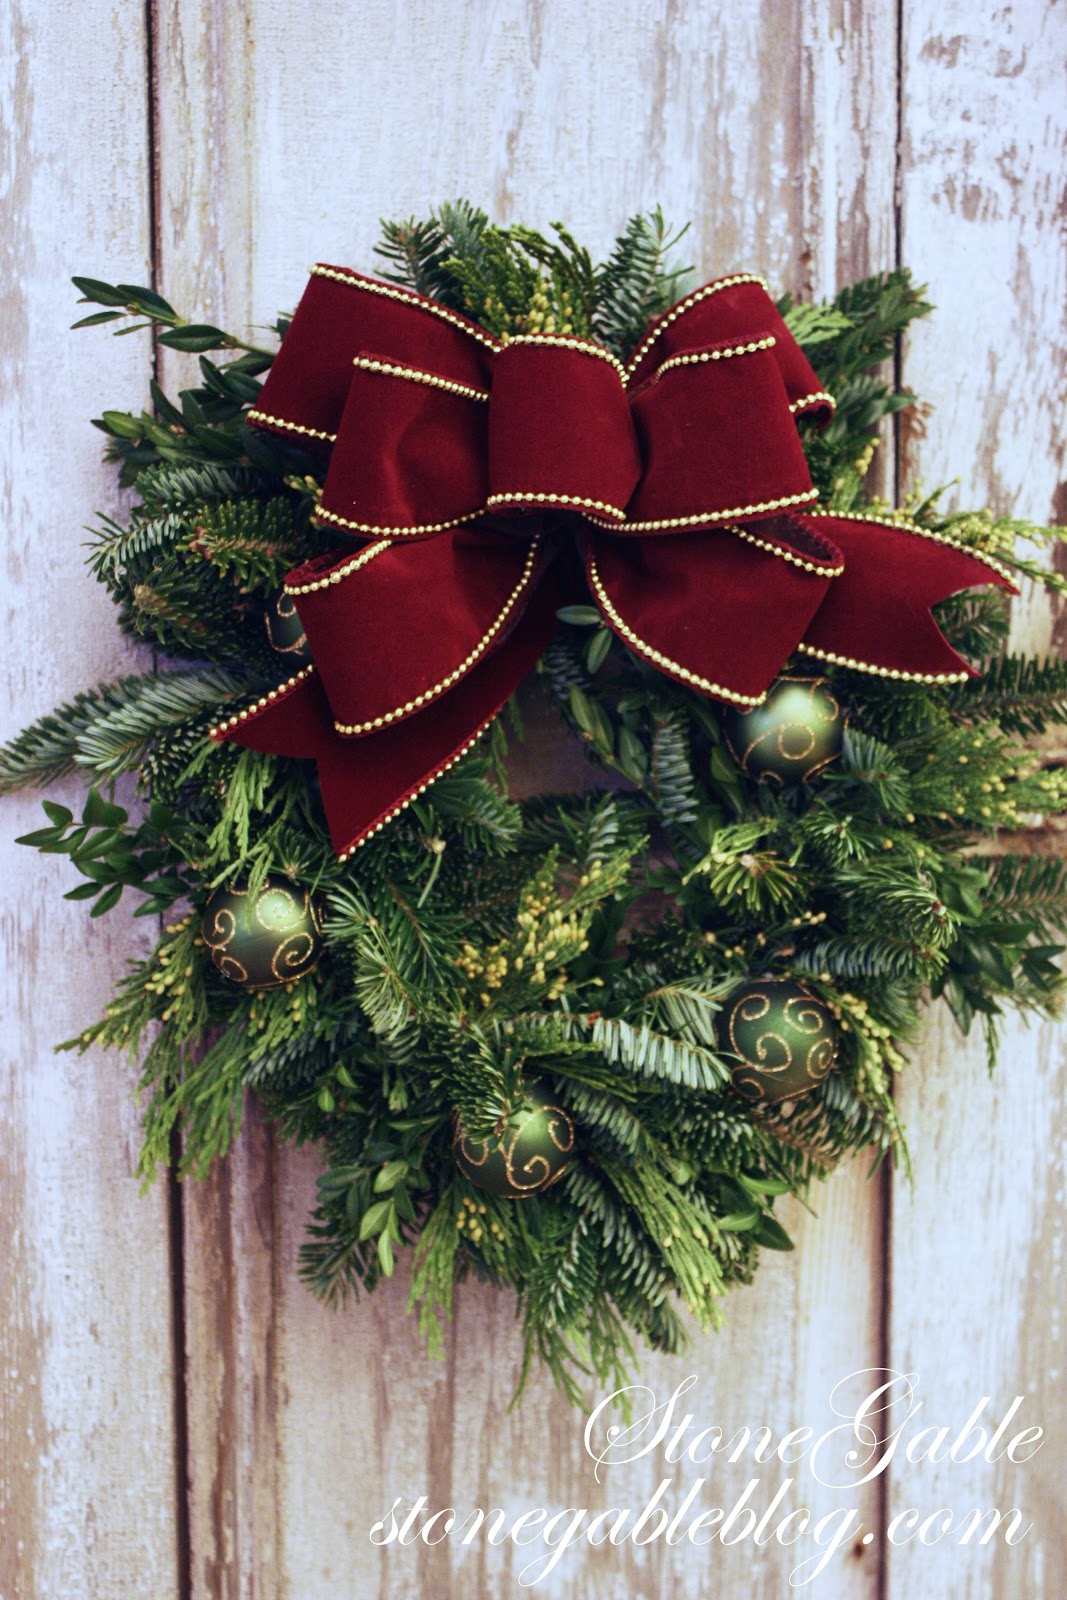 the easiest way to make a live wreath - stonegable